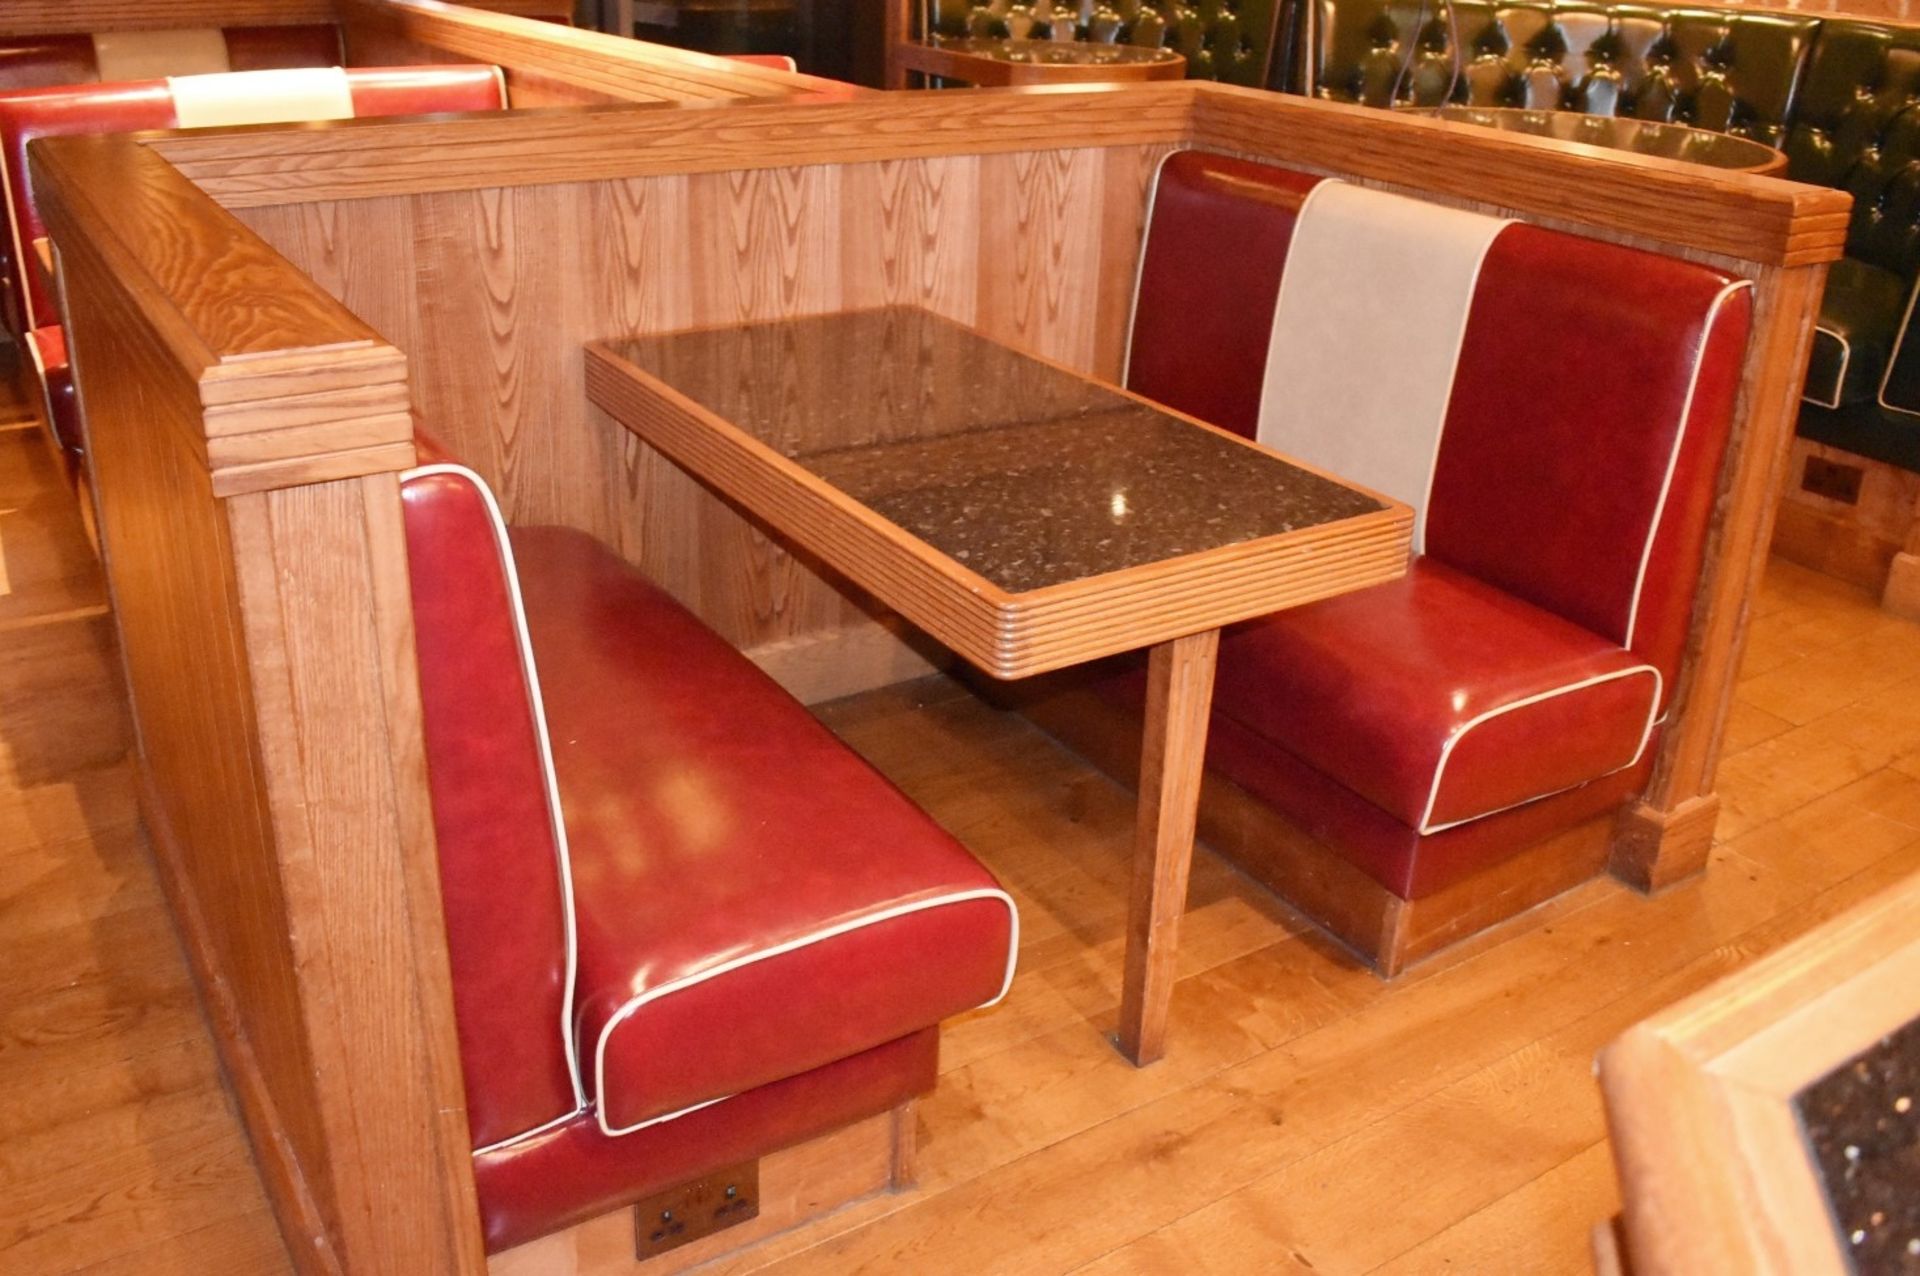 A Pair Of Single-sided 2-Person Seating Benches In A Red Faux Leather